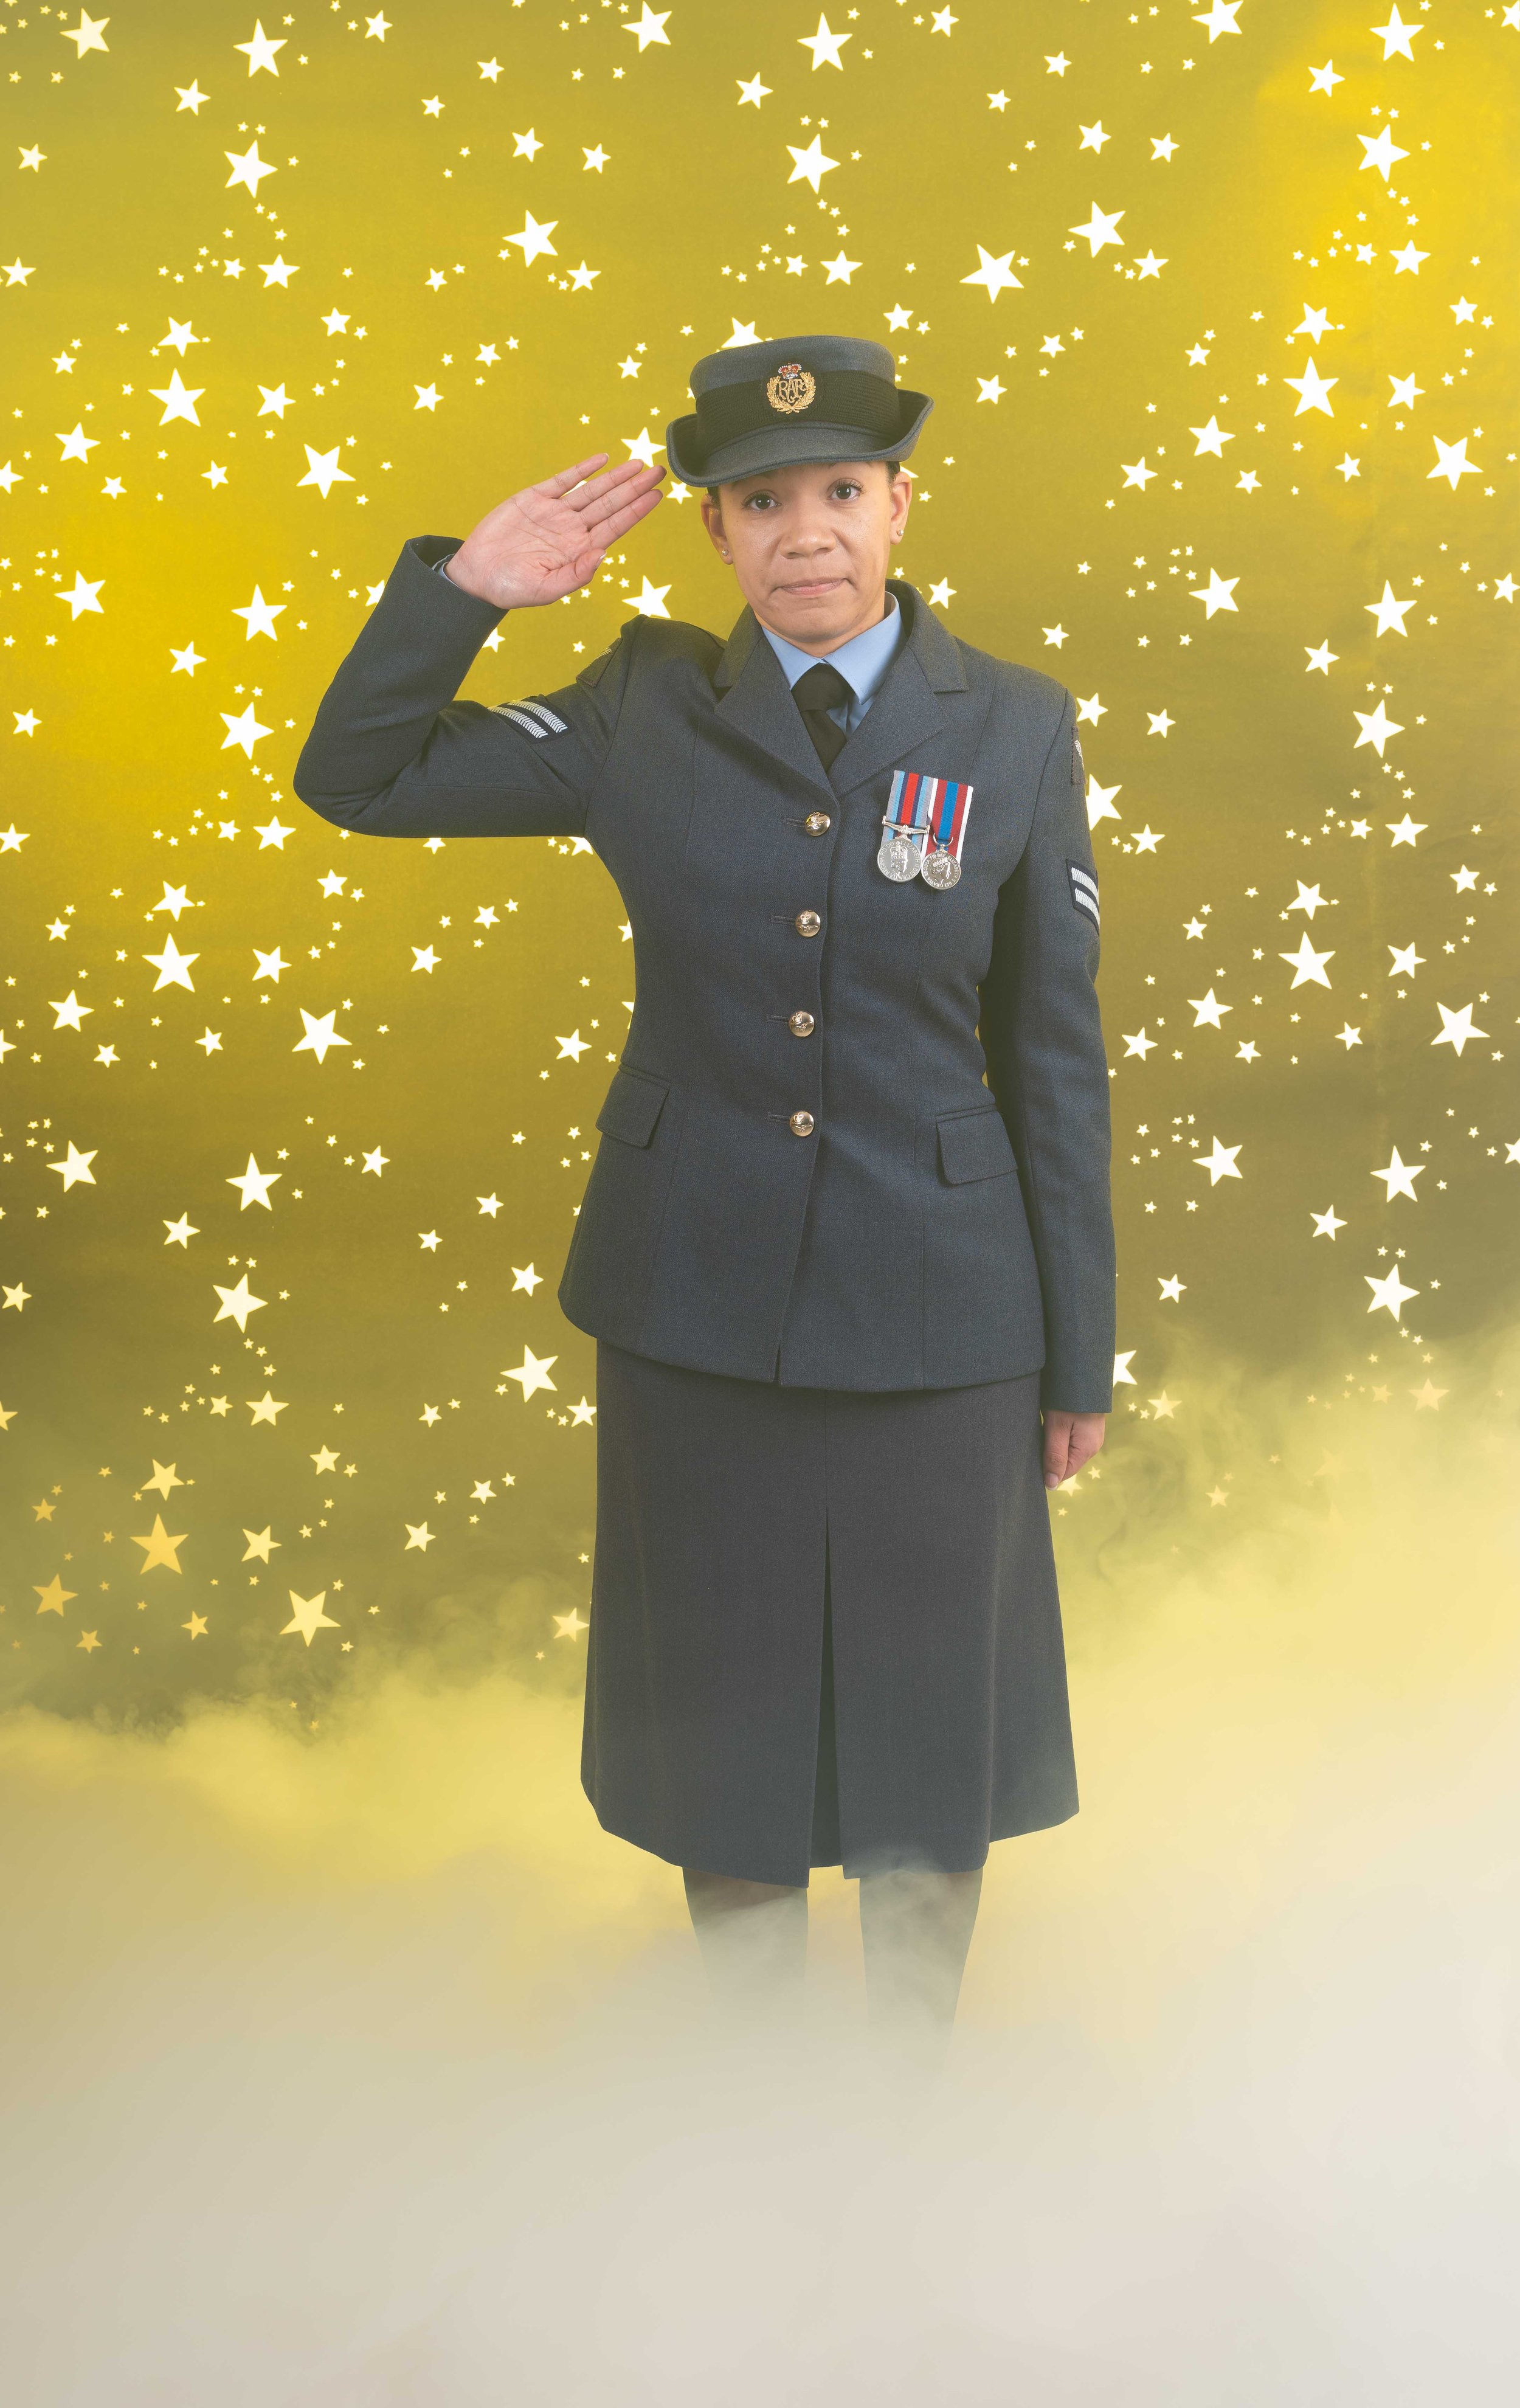 Danielle St Hilaire - Human Resources Officer (RAF)